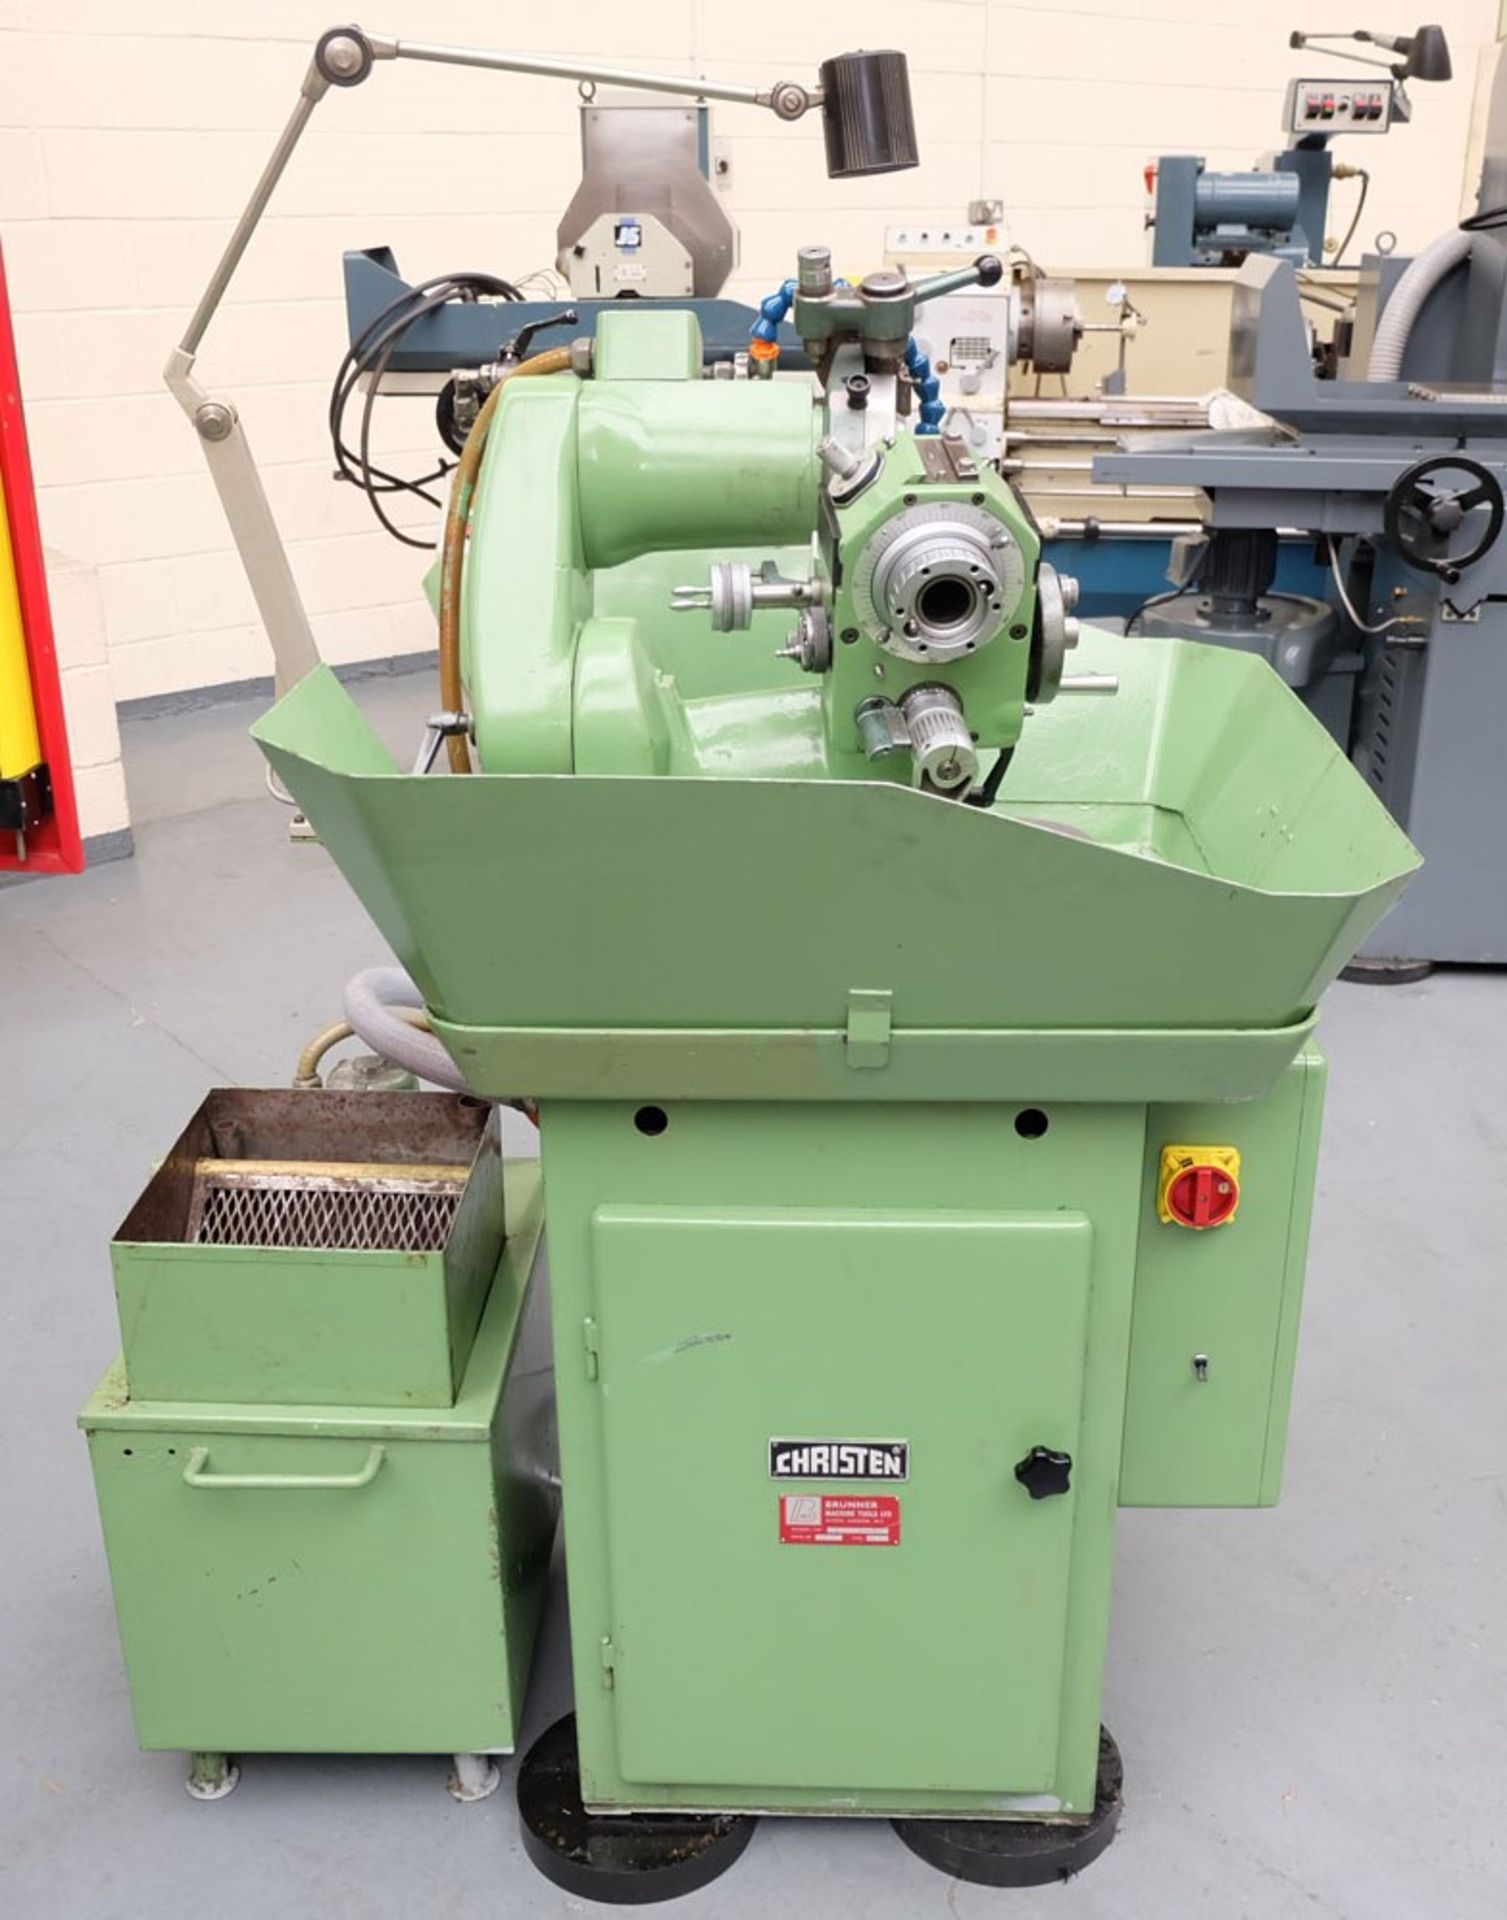 A CHRISTEN 1-32/100A Drill Grinding Machine: Capacity 1-32mm, Max Step Length 50mm, Point Angle 60- - Image 2 of 15